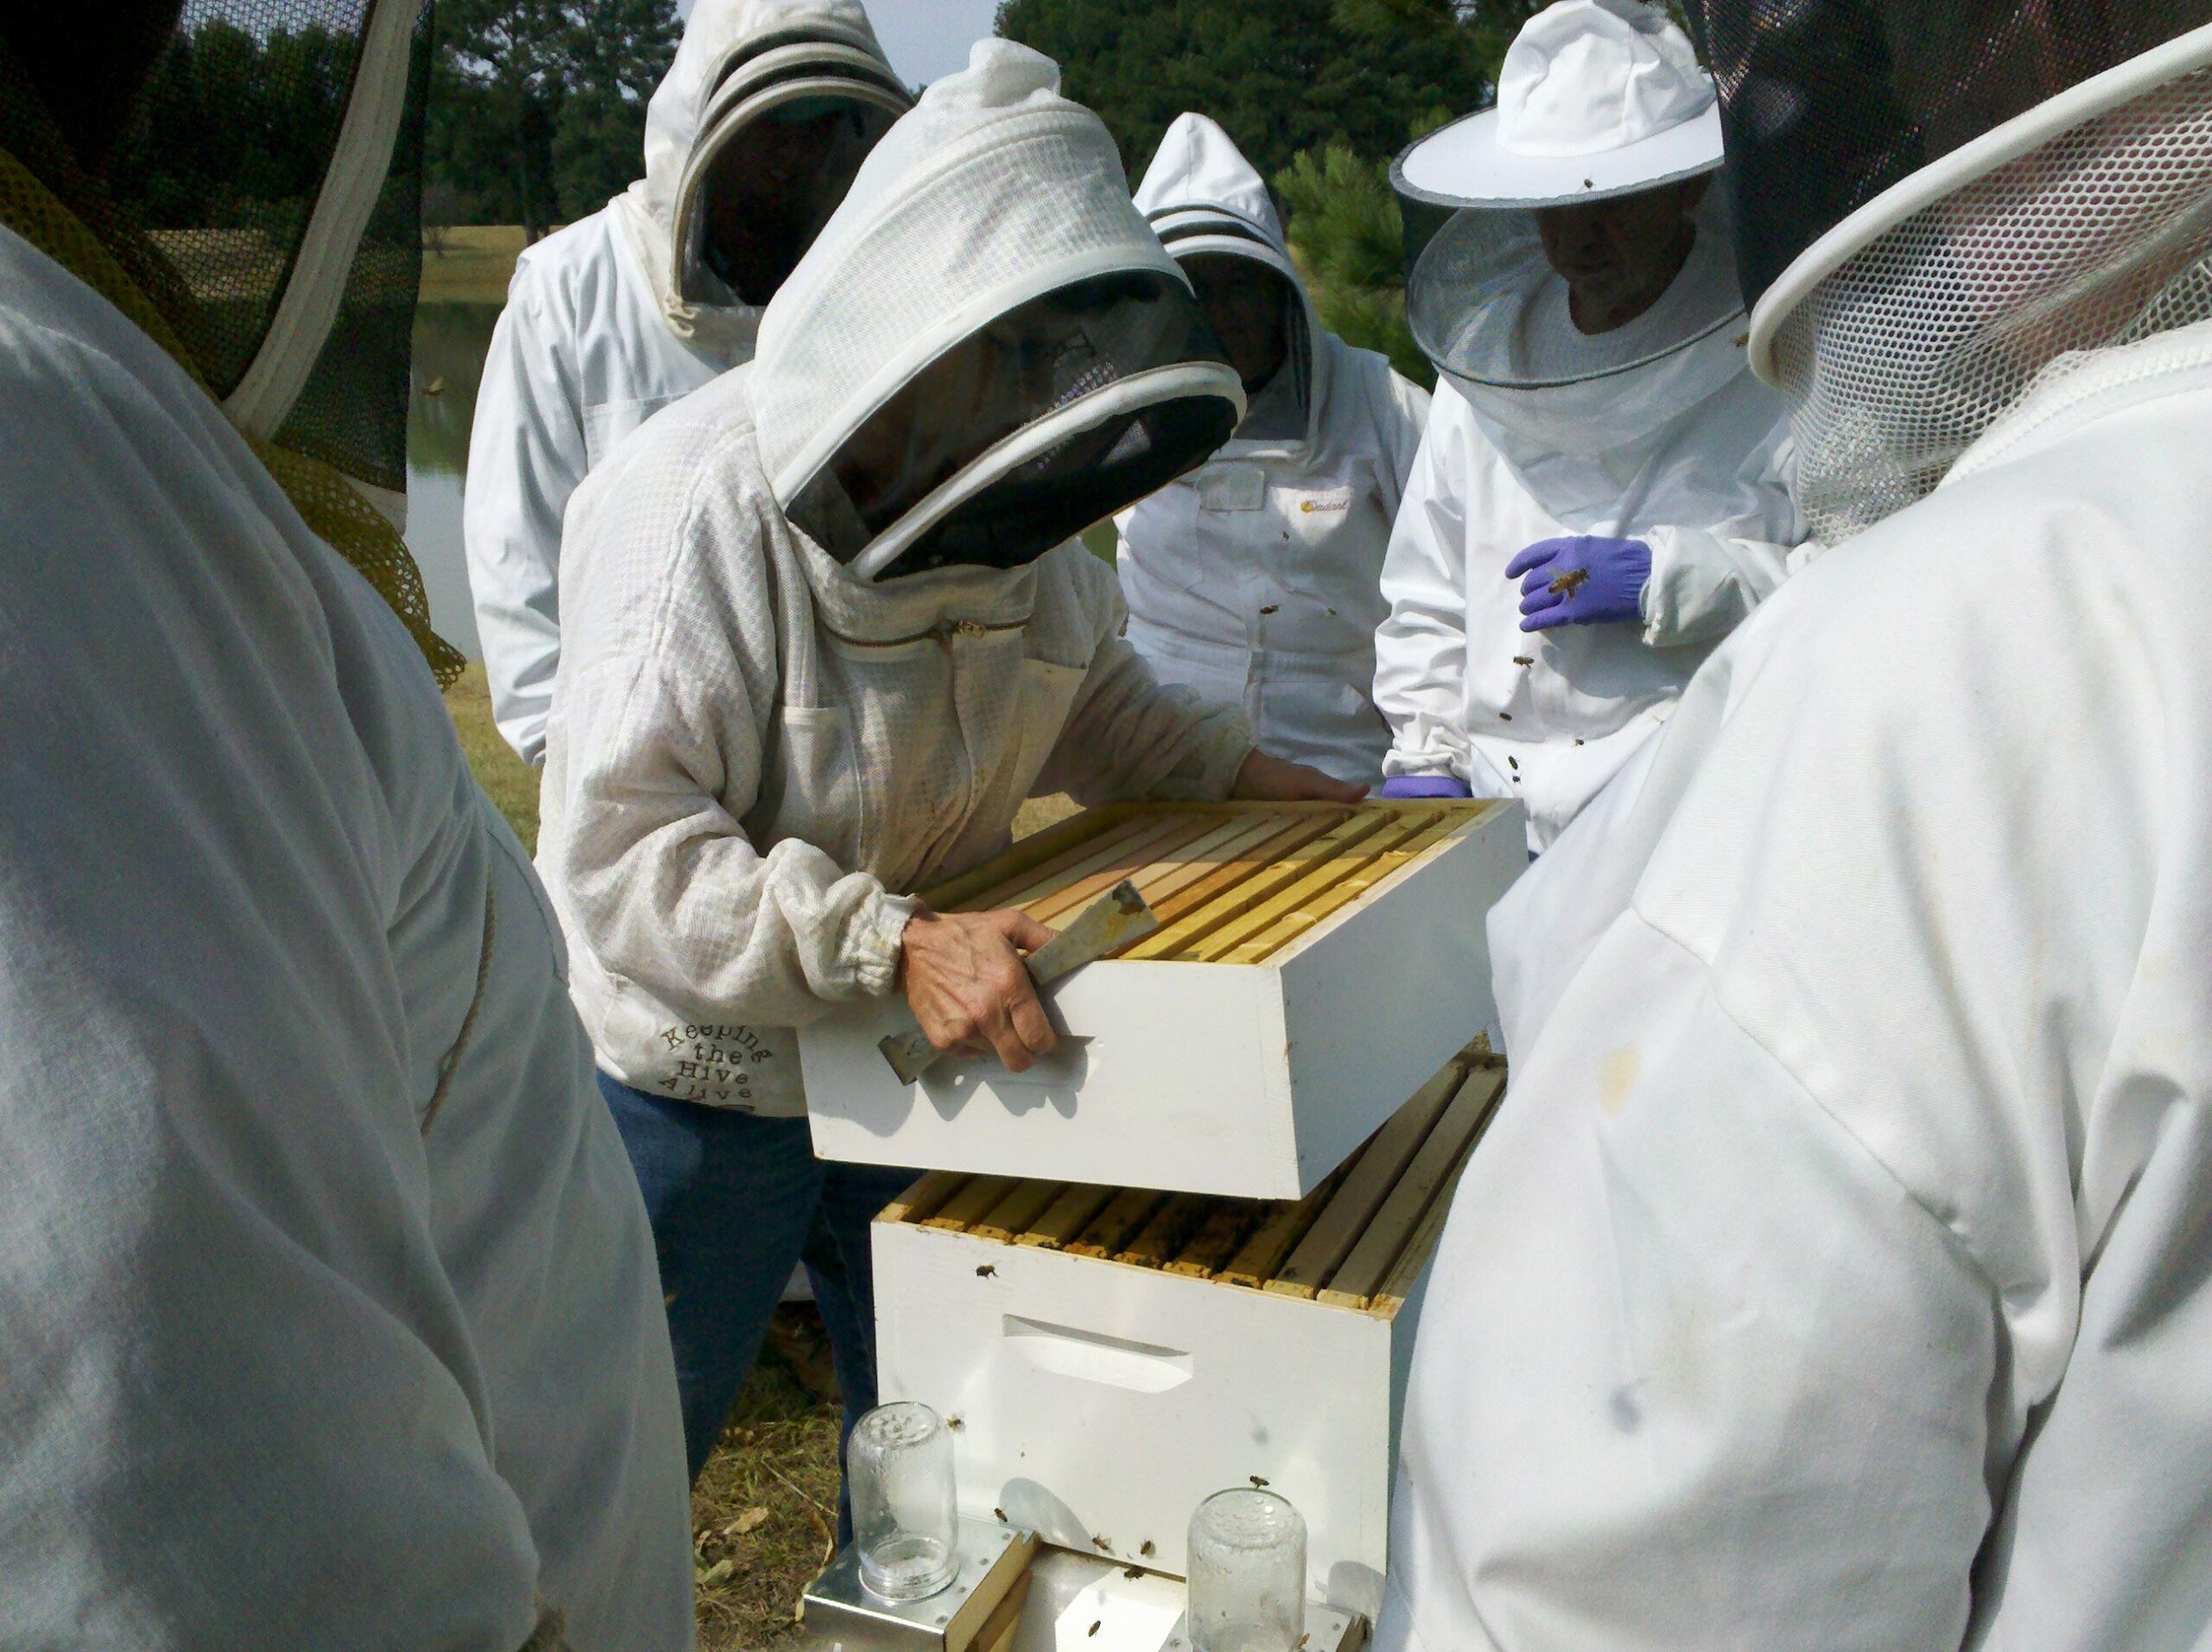 Beekeepers opening a hive